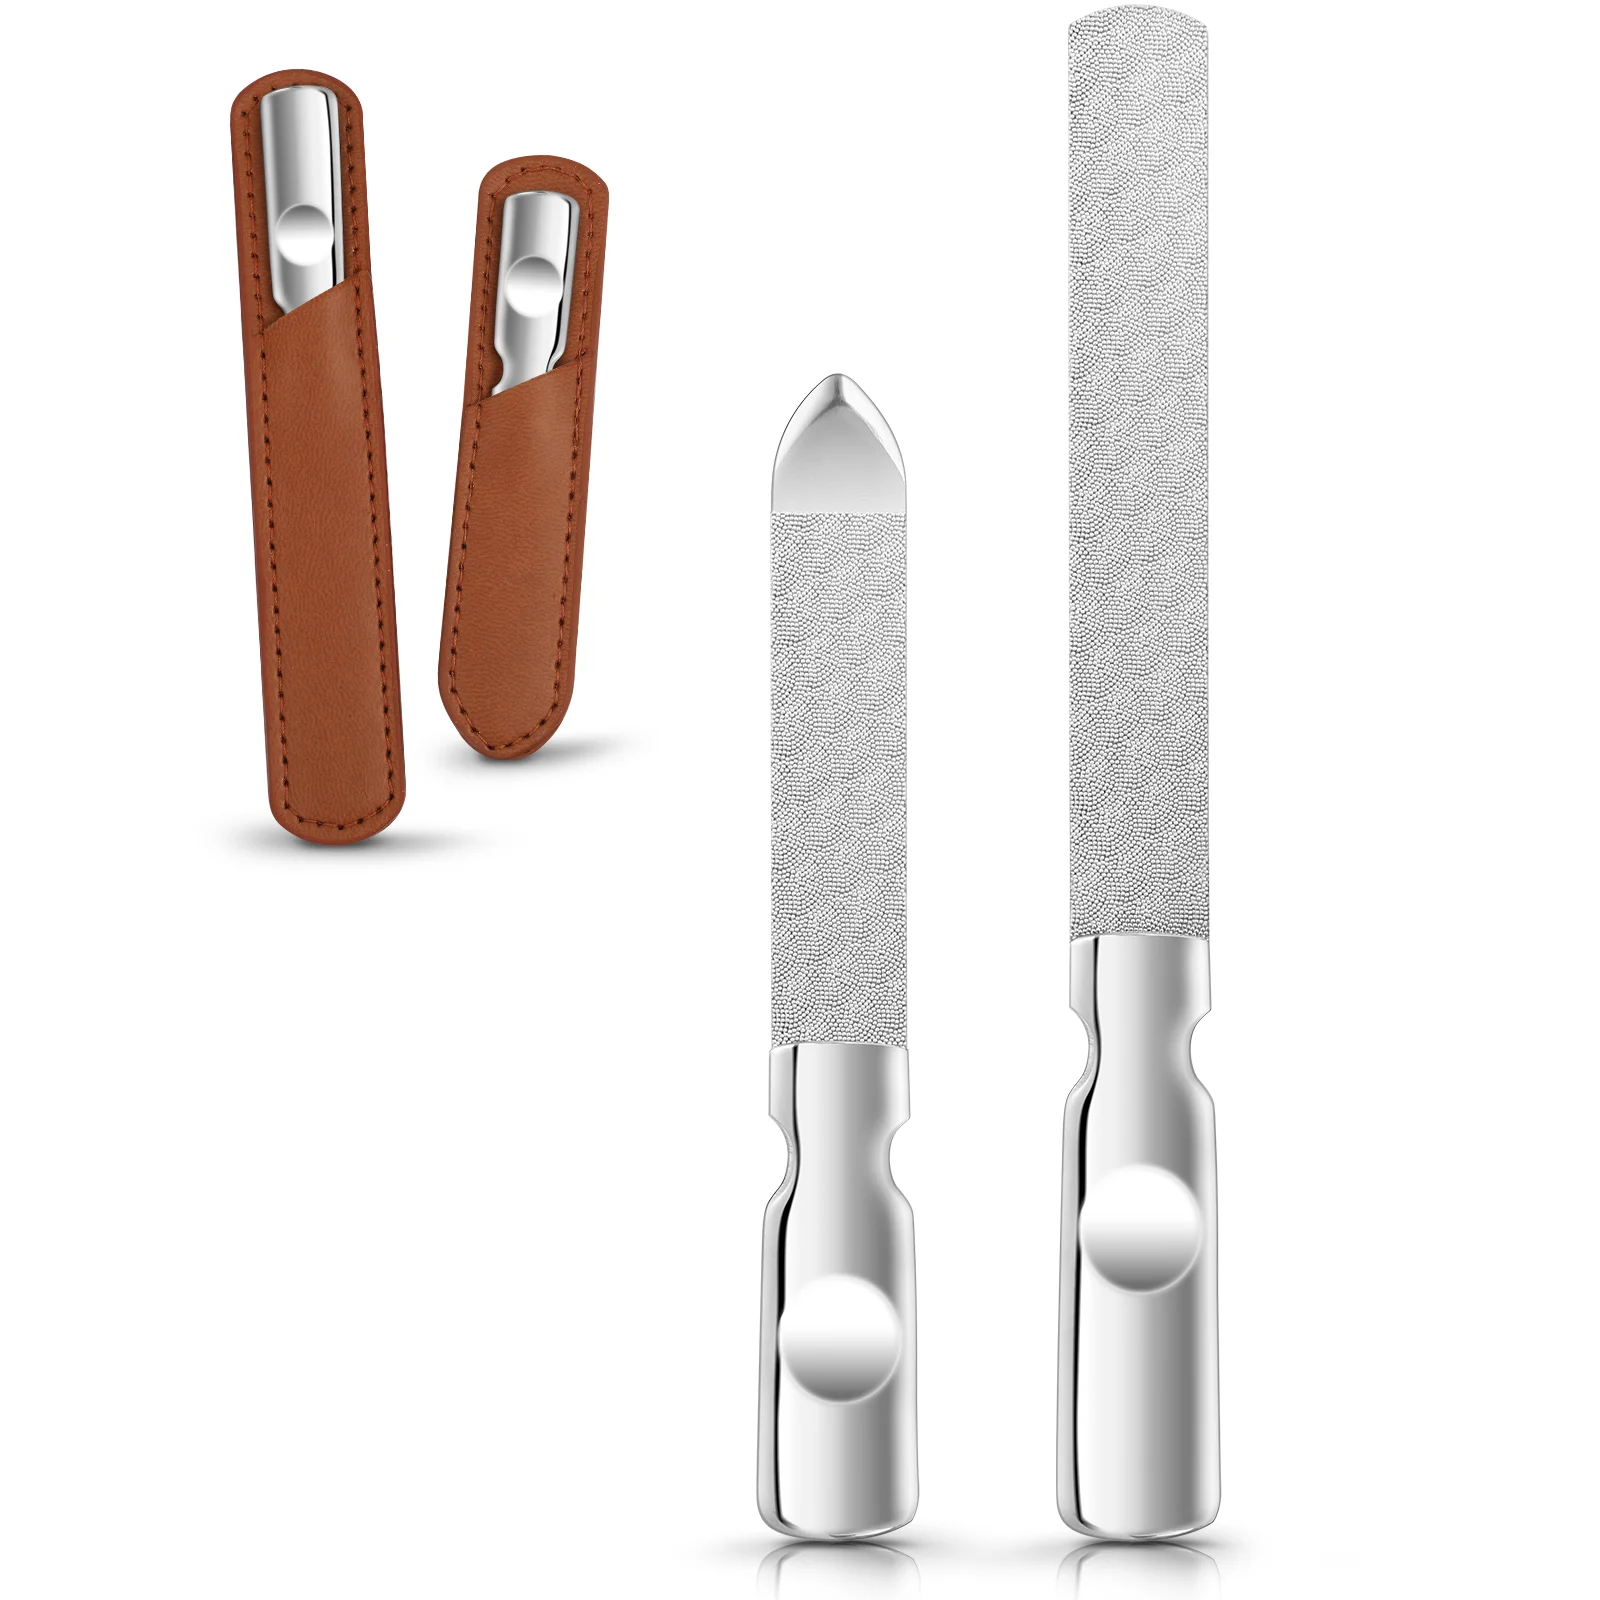 2Pcs Stainless Steel Nail File Double Sided Nail File Manicure Pedicure Tools with Leather Case for Men Women doddohome nail cutter tools manicure set pedicure sets nail clipper stainless steel nail scissors file